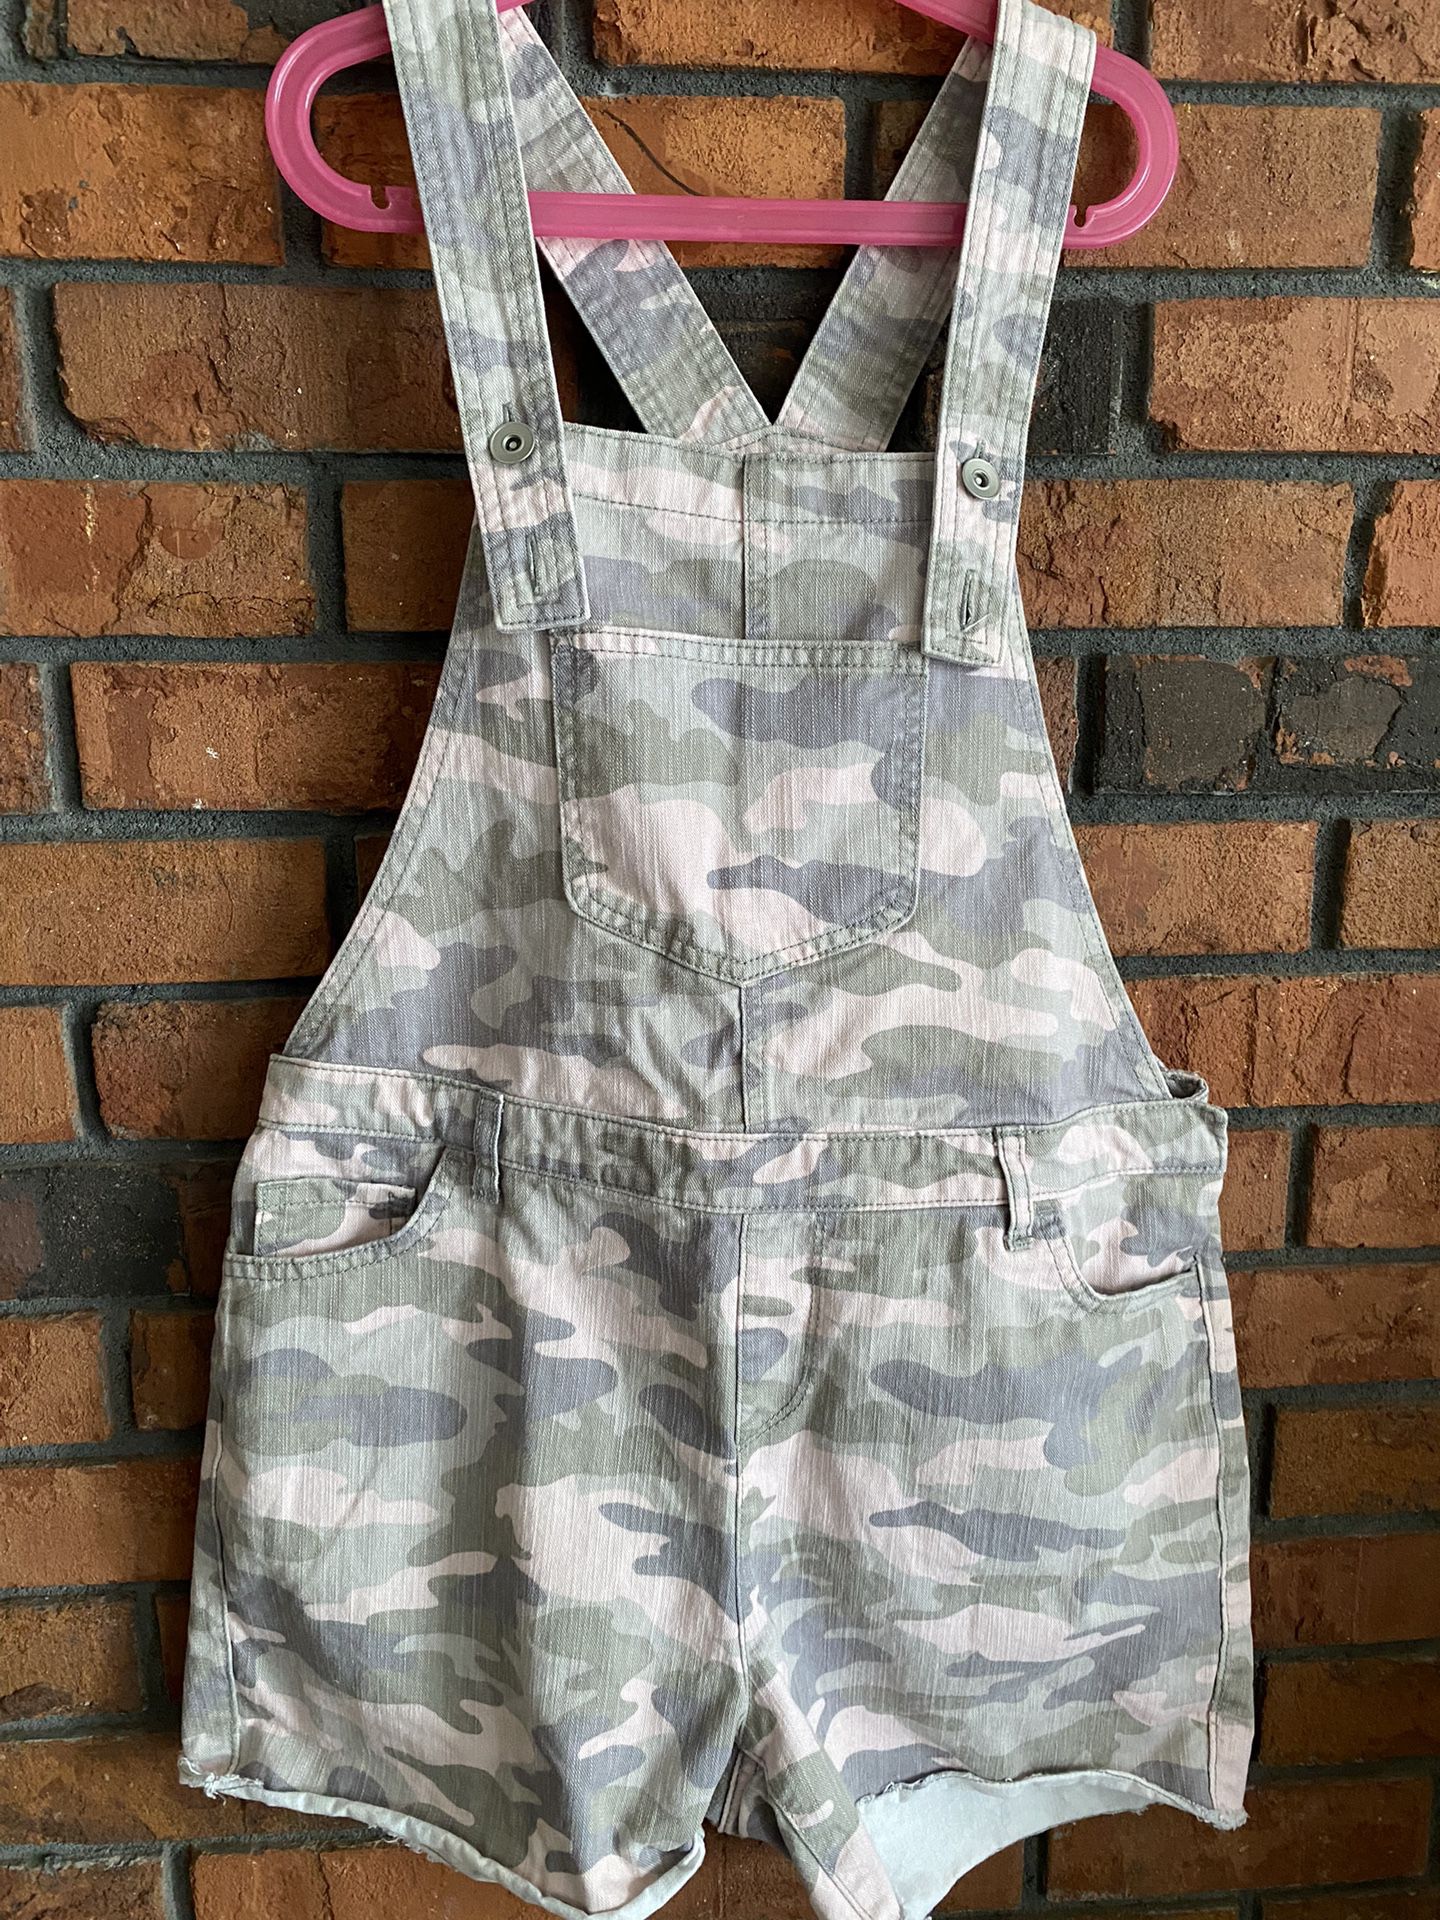 Girls Overalls Size 16